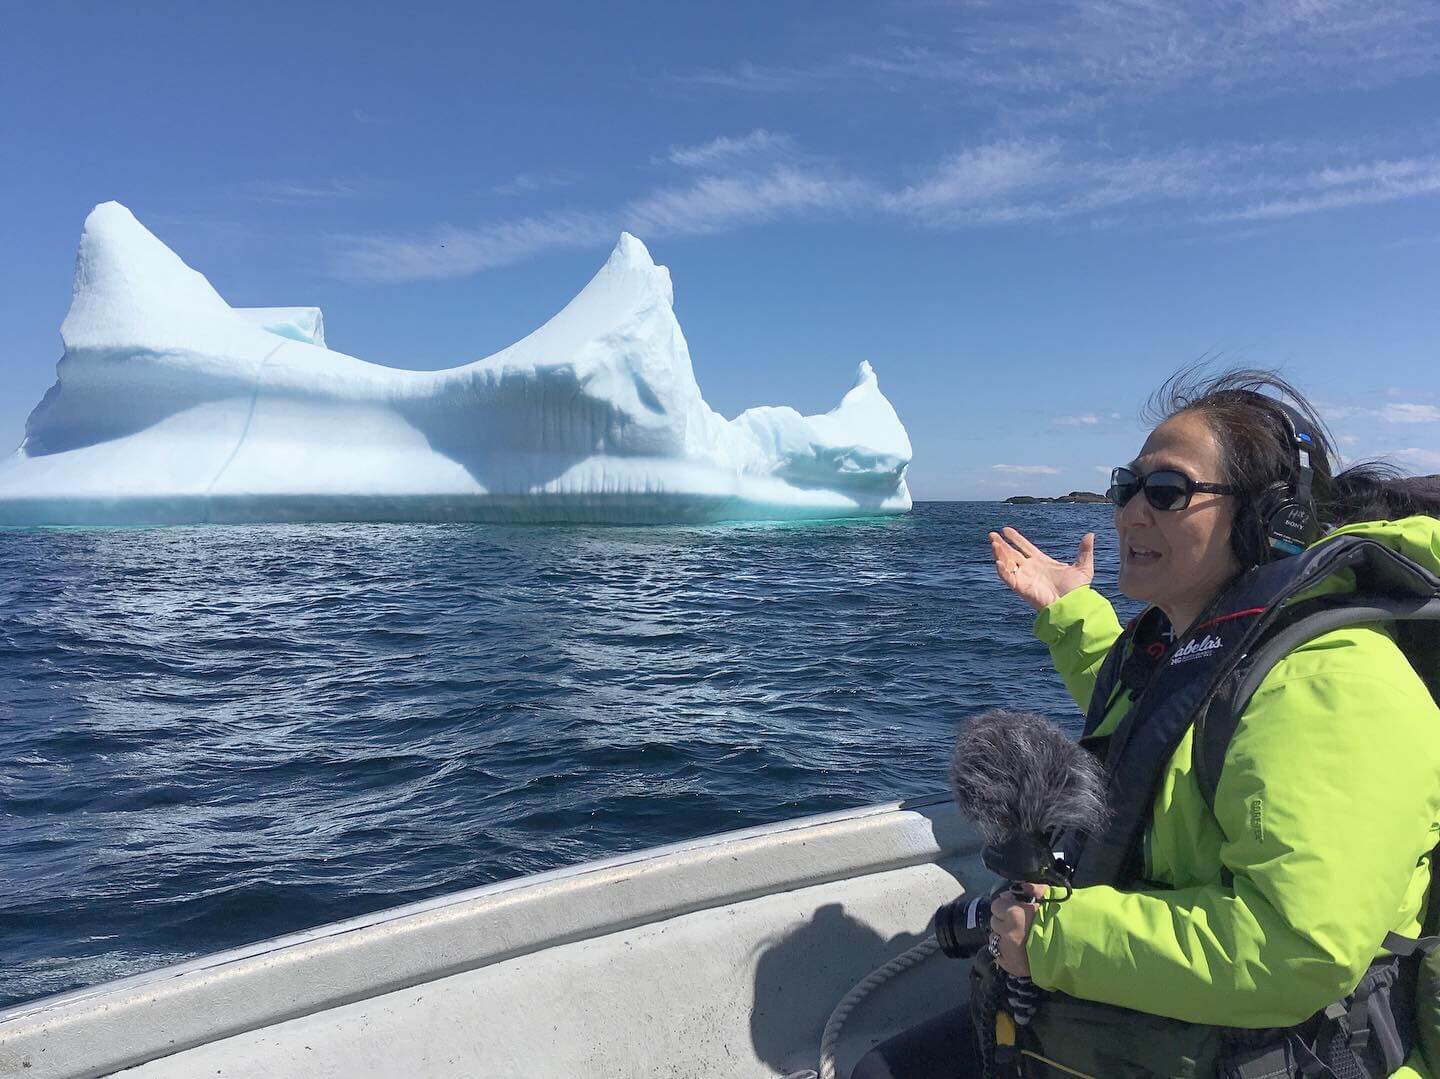 Production still of Rea Tajiri sitting in a side profile to the camera. She is wearing a bright green coat and is in a boat on the ocean. She is in front of an iceberg, wearing headphones and sunglasses. She is holding a camera and microphone with a fluffy cover.